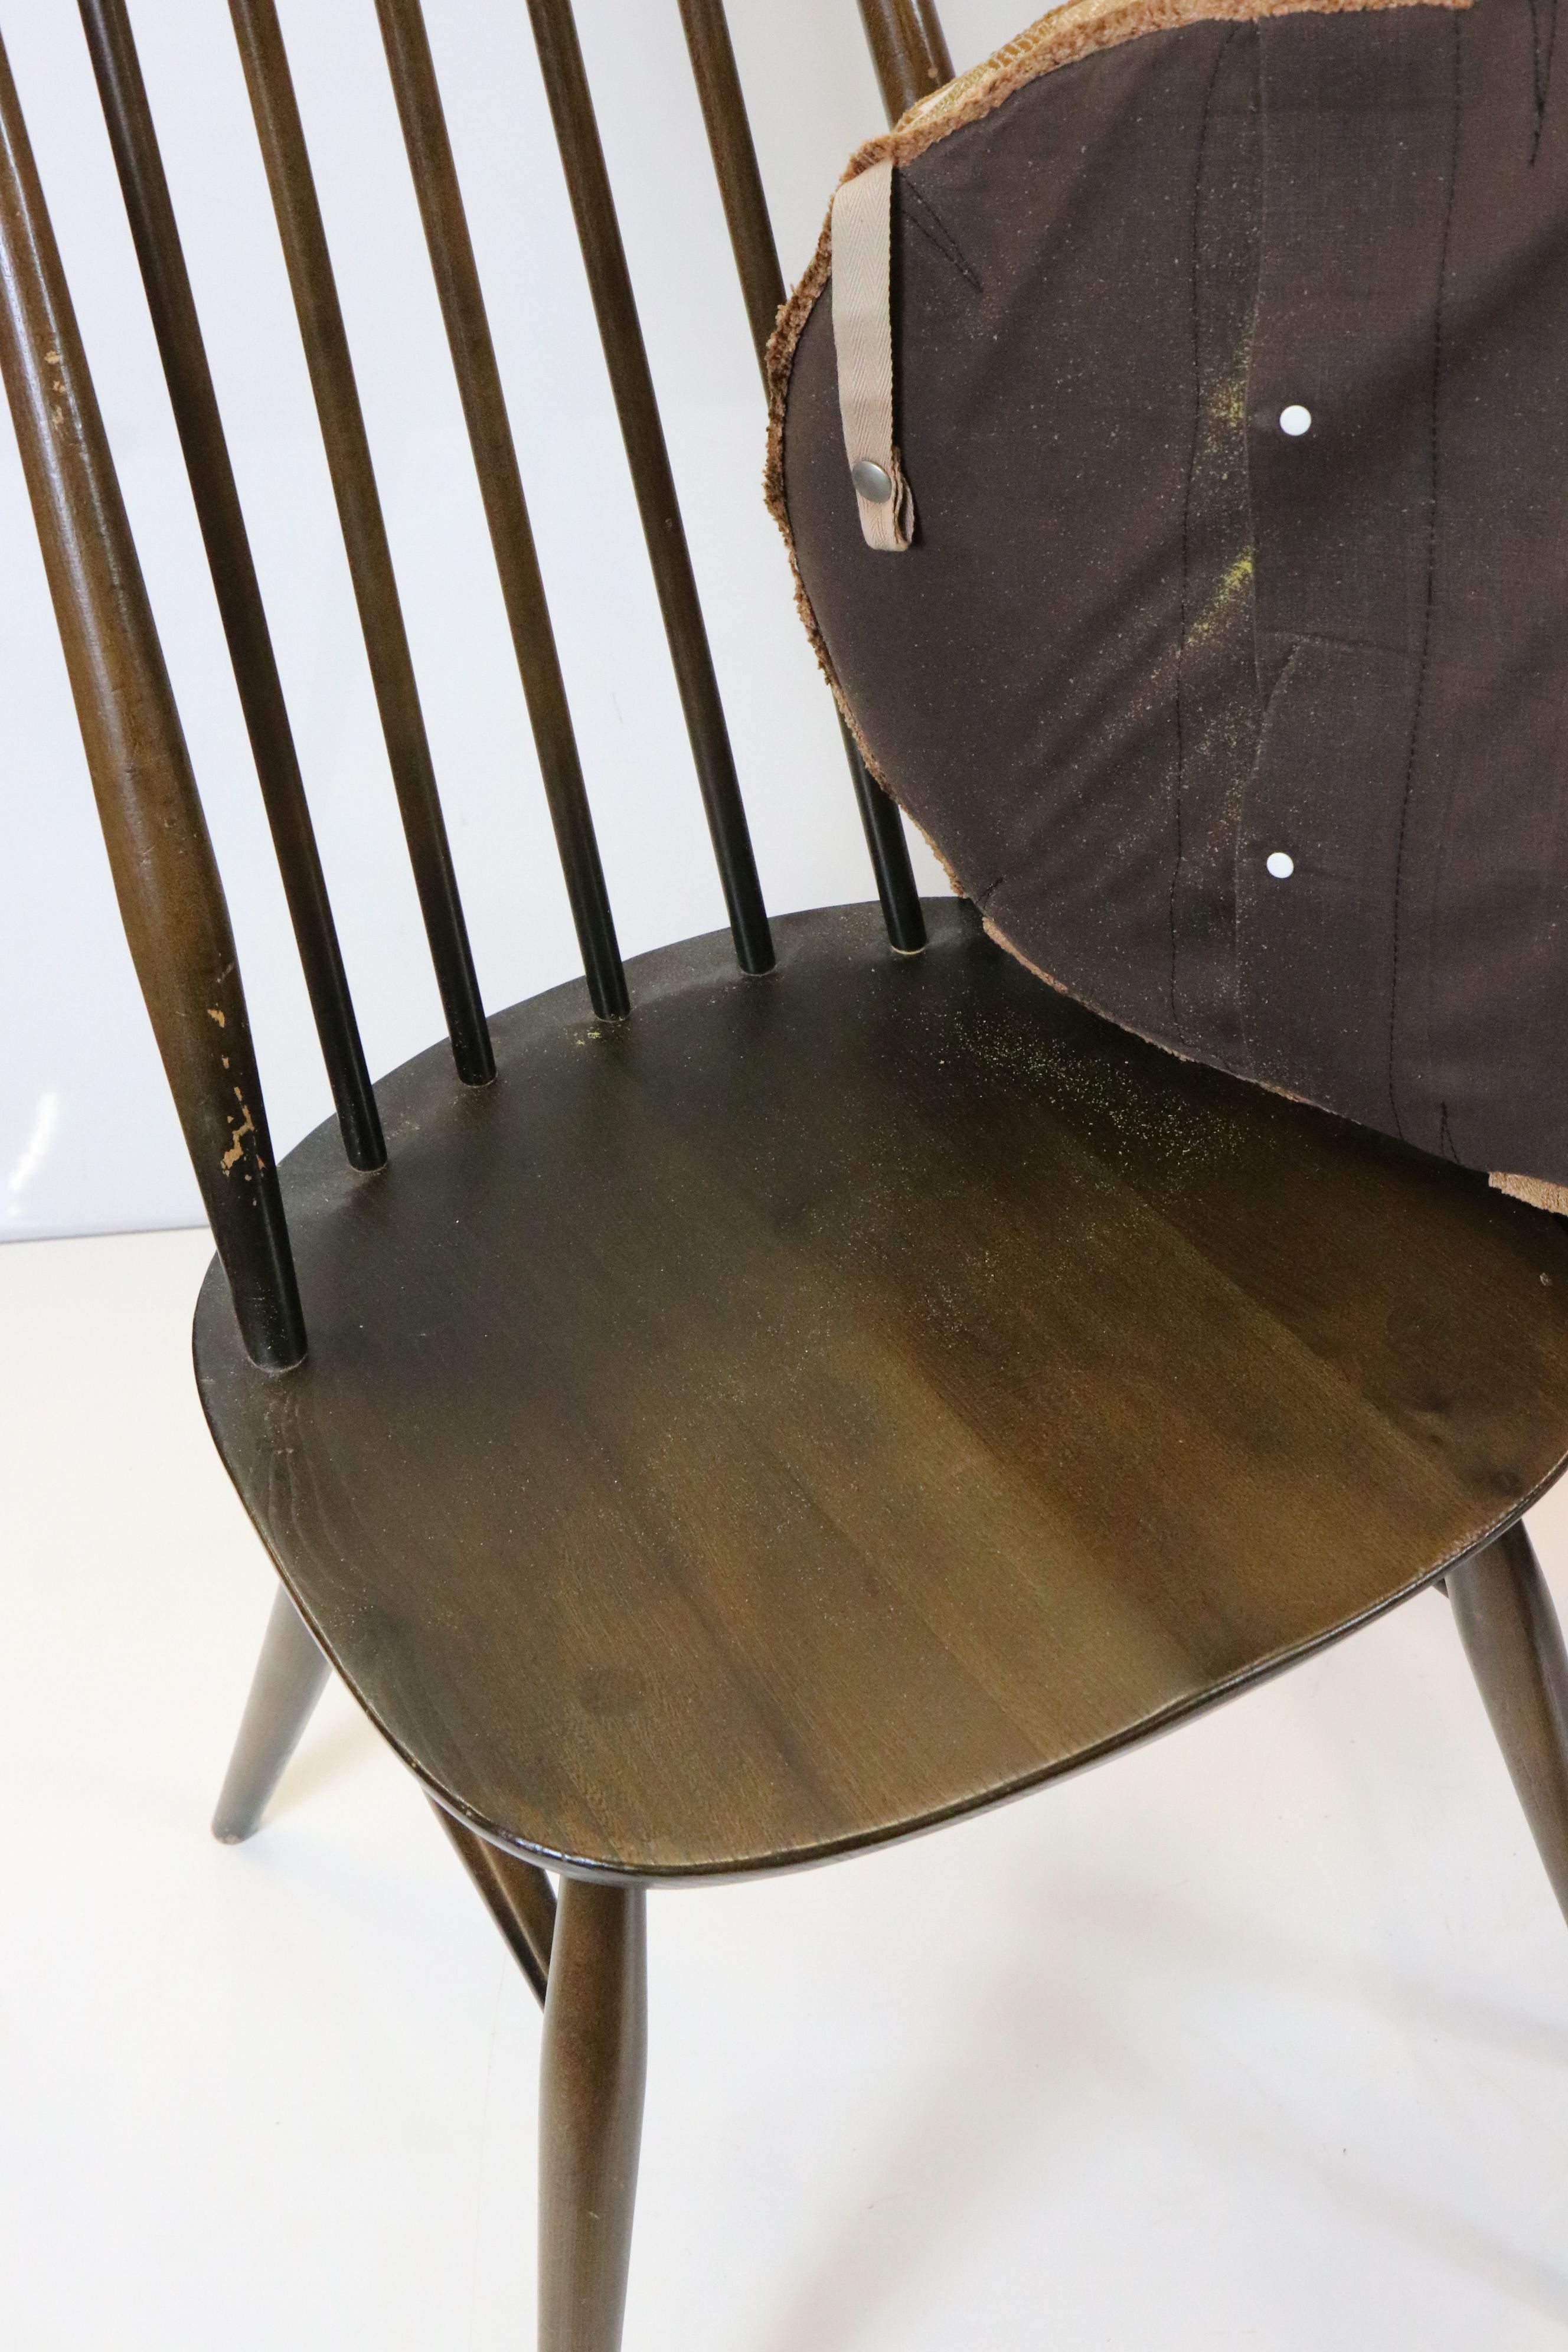 Set of Four Ercol ' Goldsmith ' Dining Chairs with the original Ercol seat pads - Image 4 of 7